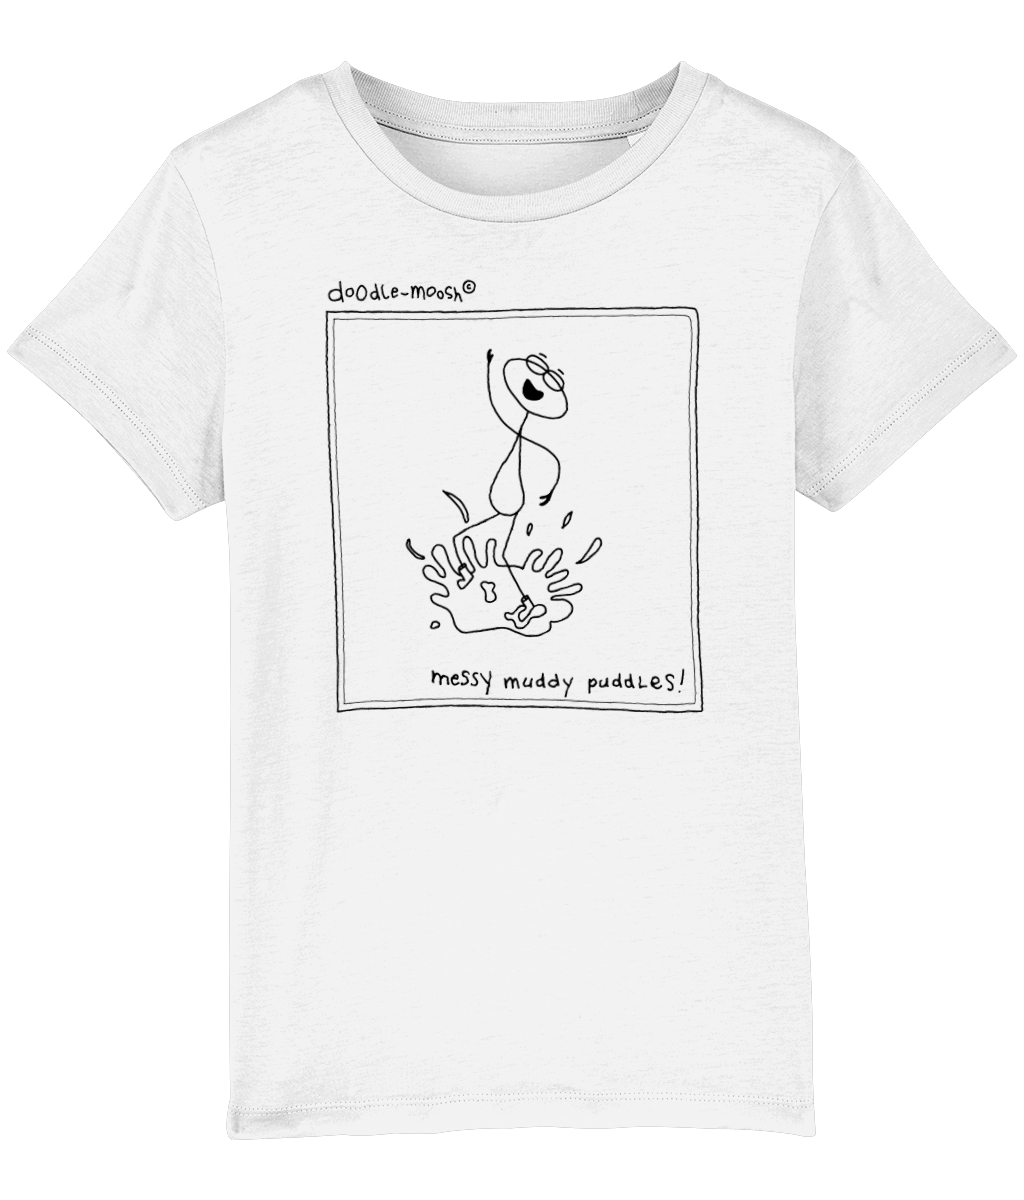 Messy muddy puddles t-shirt, white with black